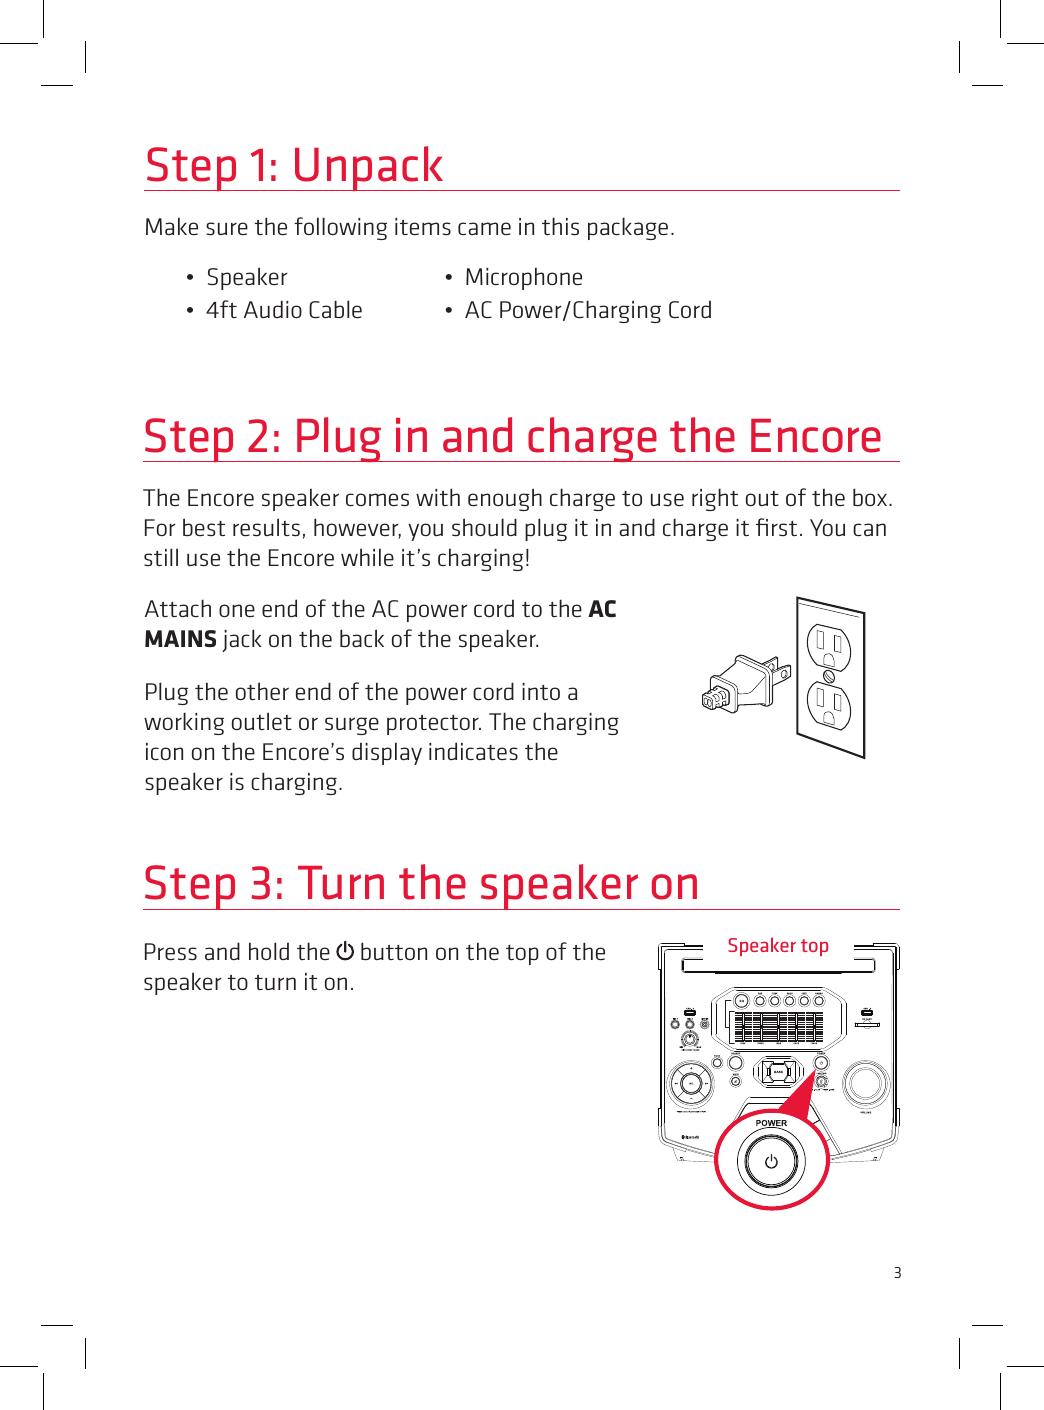 3Press and hold the   button on the top of the speaker to turn it on.Step 2: Plug in and charge the EncoreThe Encore speaker comes with enough charge to use right out of the box. For best results, however, you should plug it in and charge it ﬁrst. You can still use the Encore while it’s charging! Step 3: Turn the speaker onStep 1: UnpackMake sure the following items came in this package.•  Speaker     •  Microphone•  4ft Audio Cable   •  AC Power/Charging CordAttach one end of the AC power cord to the AC MAINS jack on the back of the speaker.Plug the other end of the power cord into a working outlet or surge protector. The charging icon on the Encore’s display indicates the speaker is charging.Speaker top